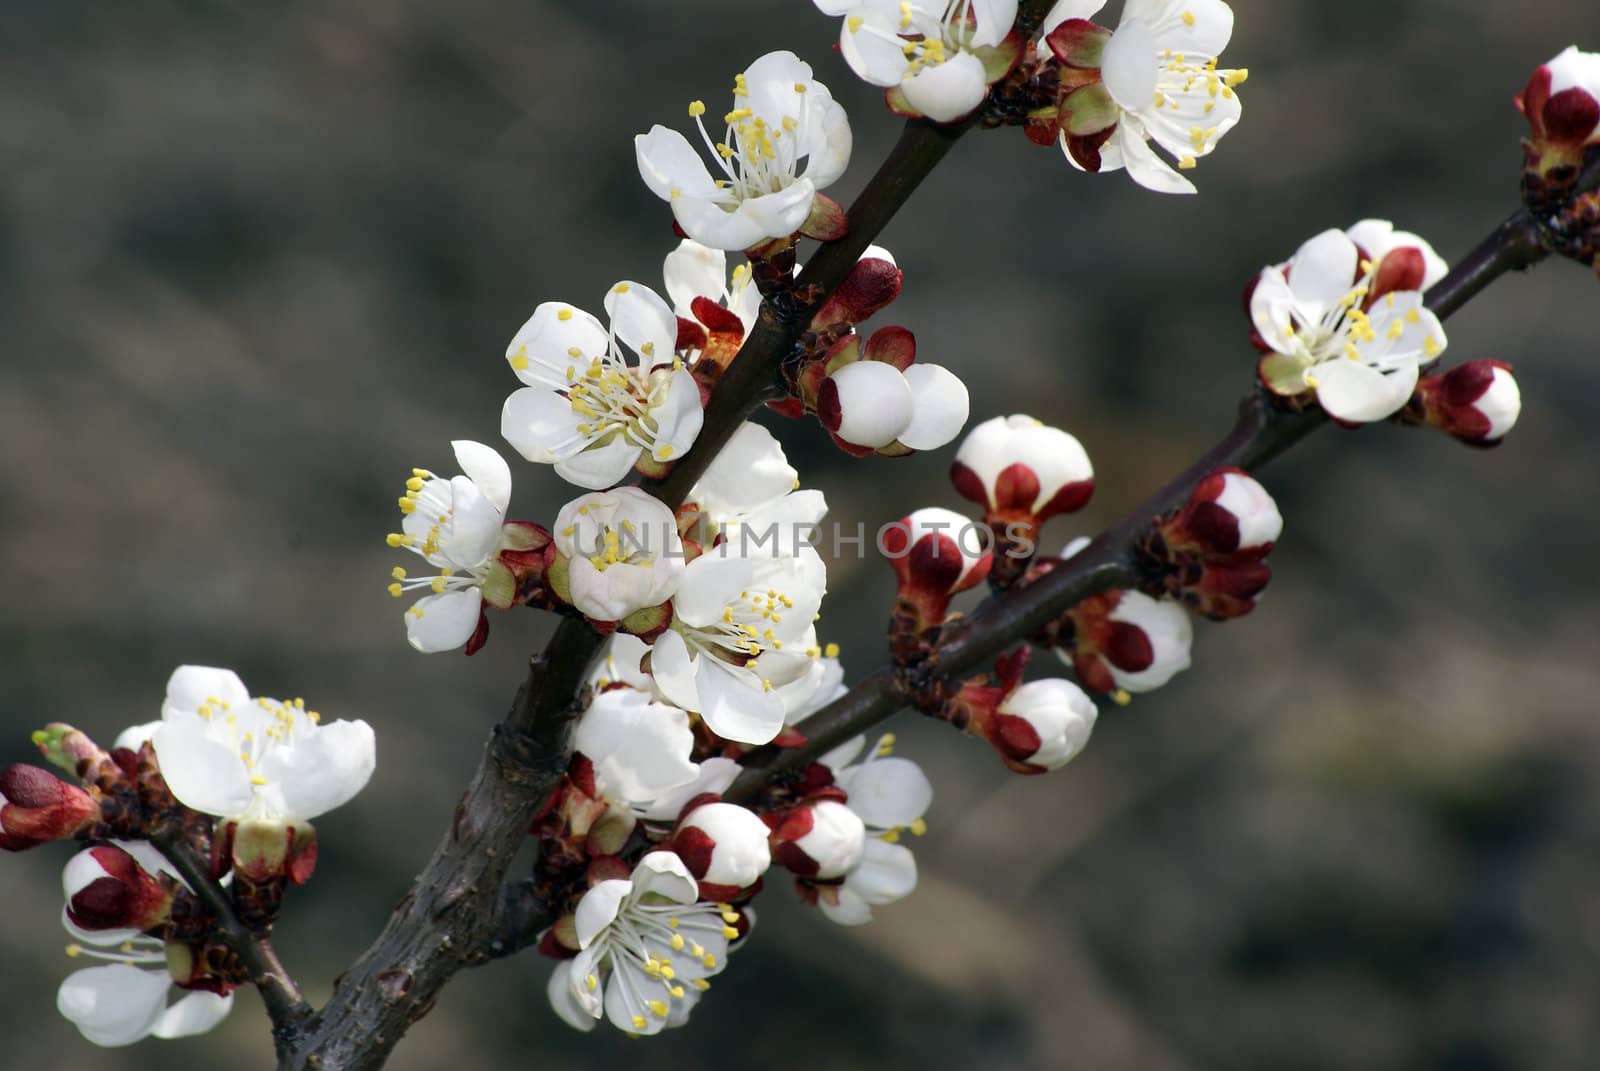 A Closeup shot of lovely apricot blossoms.